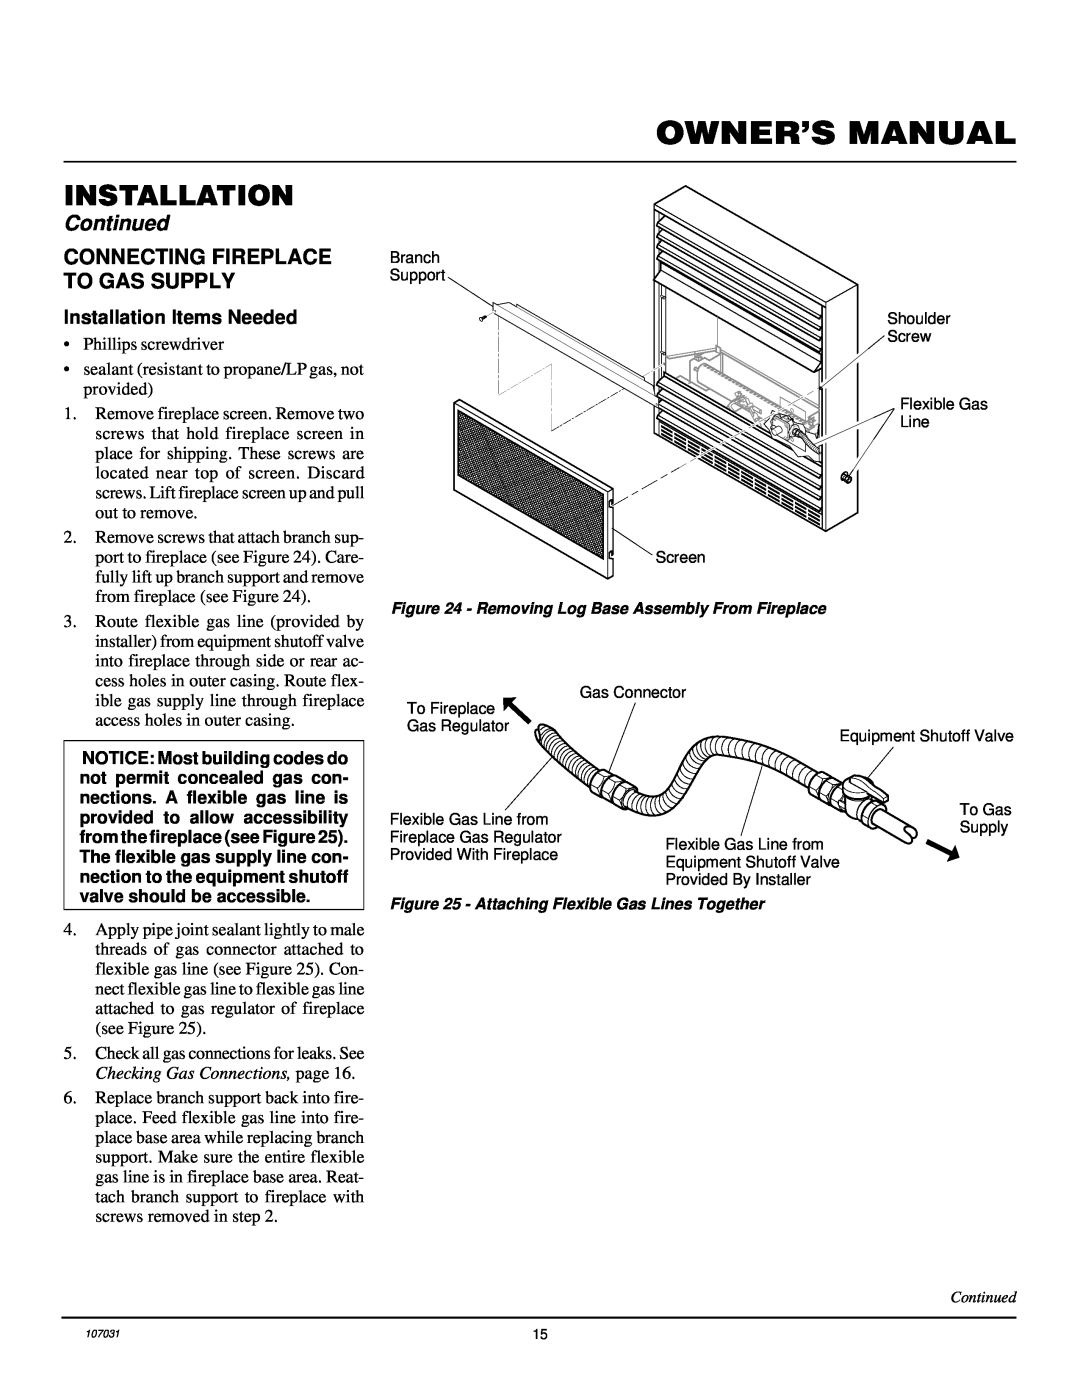 Vanguard Heating VMH10TNB installation manual Continued, Connecting Fireplace To Gas Supply, Installation Items Needed 